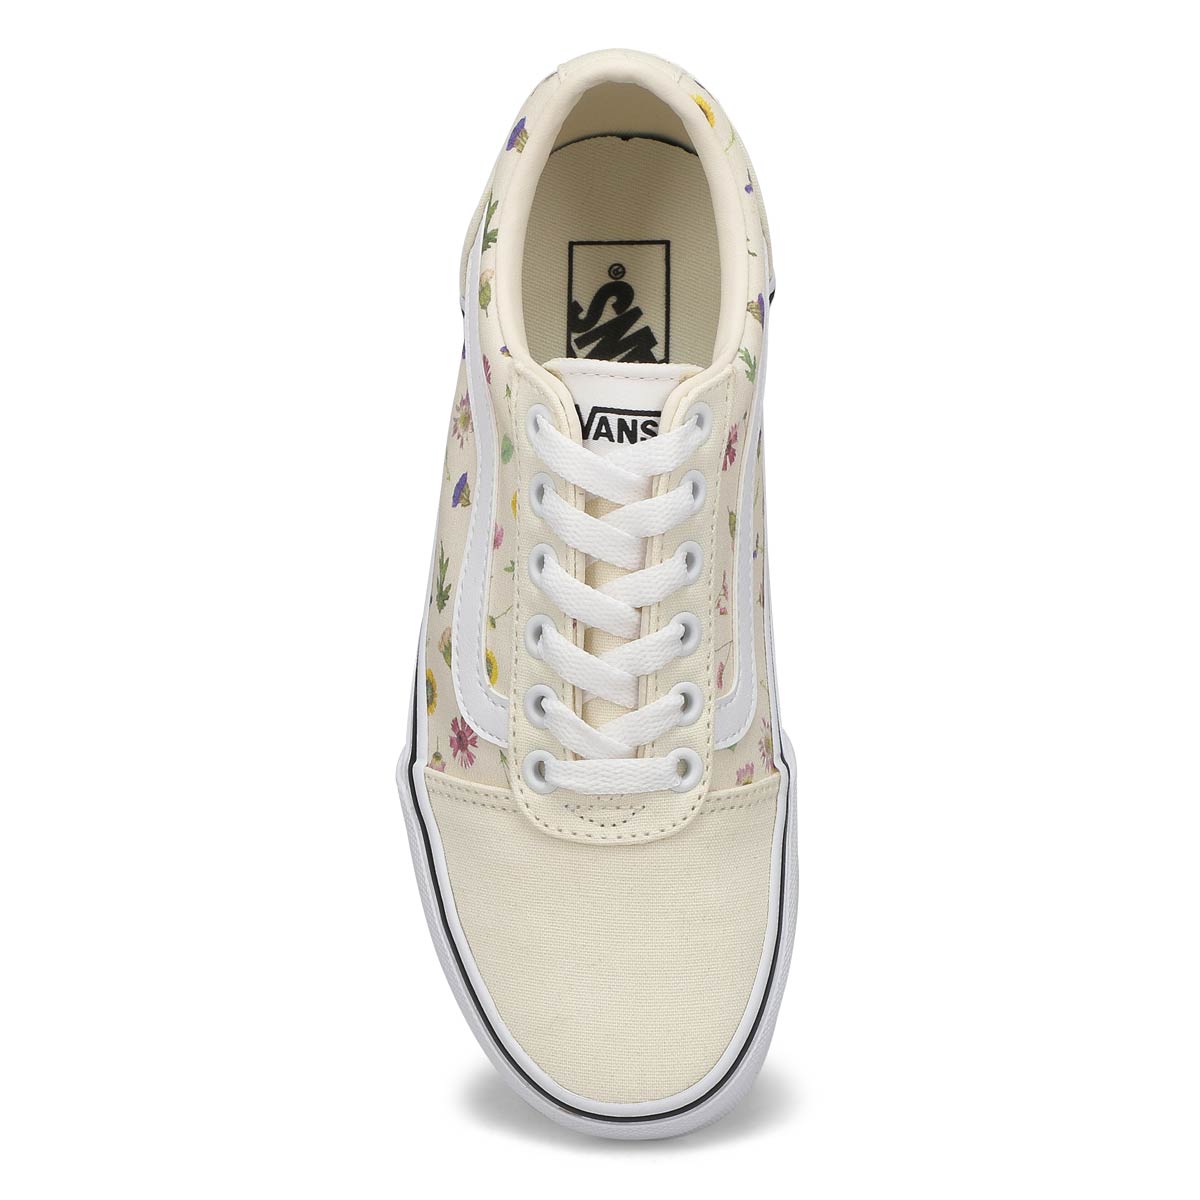 Women's Ward Floral Lace Up Sneaker - White